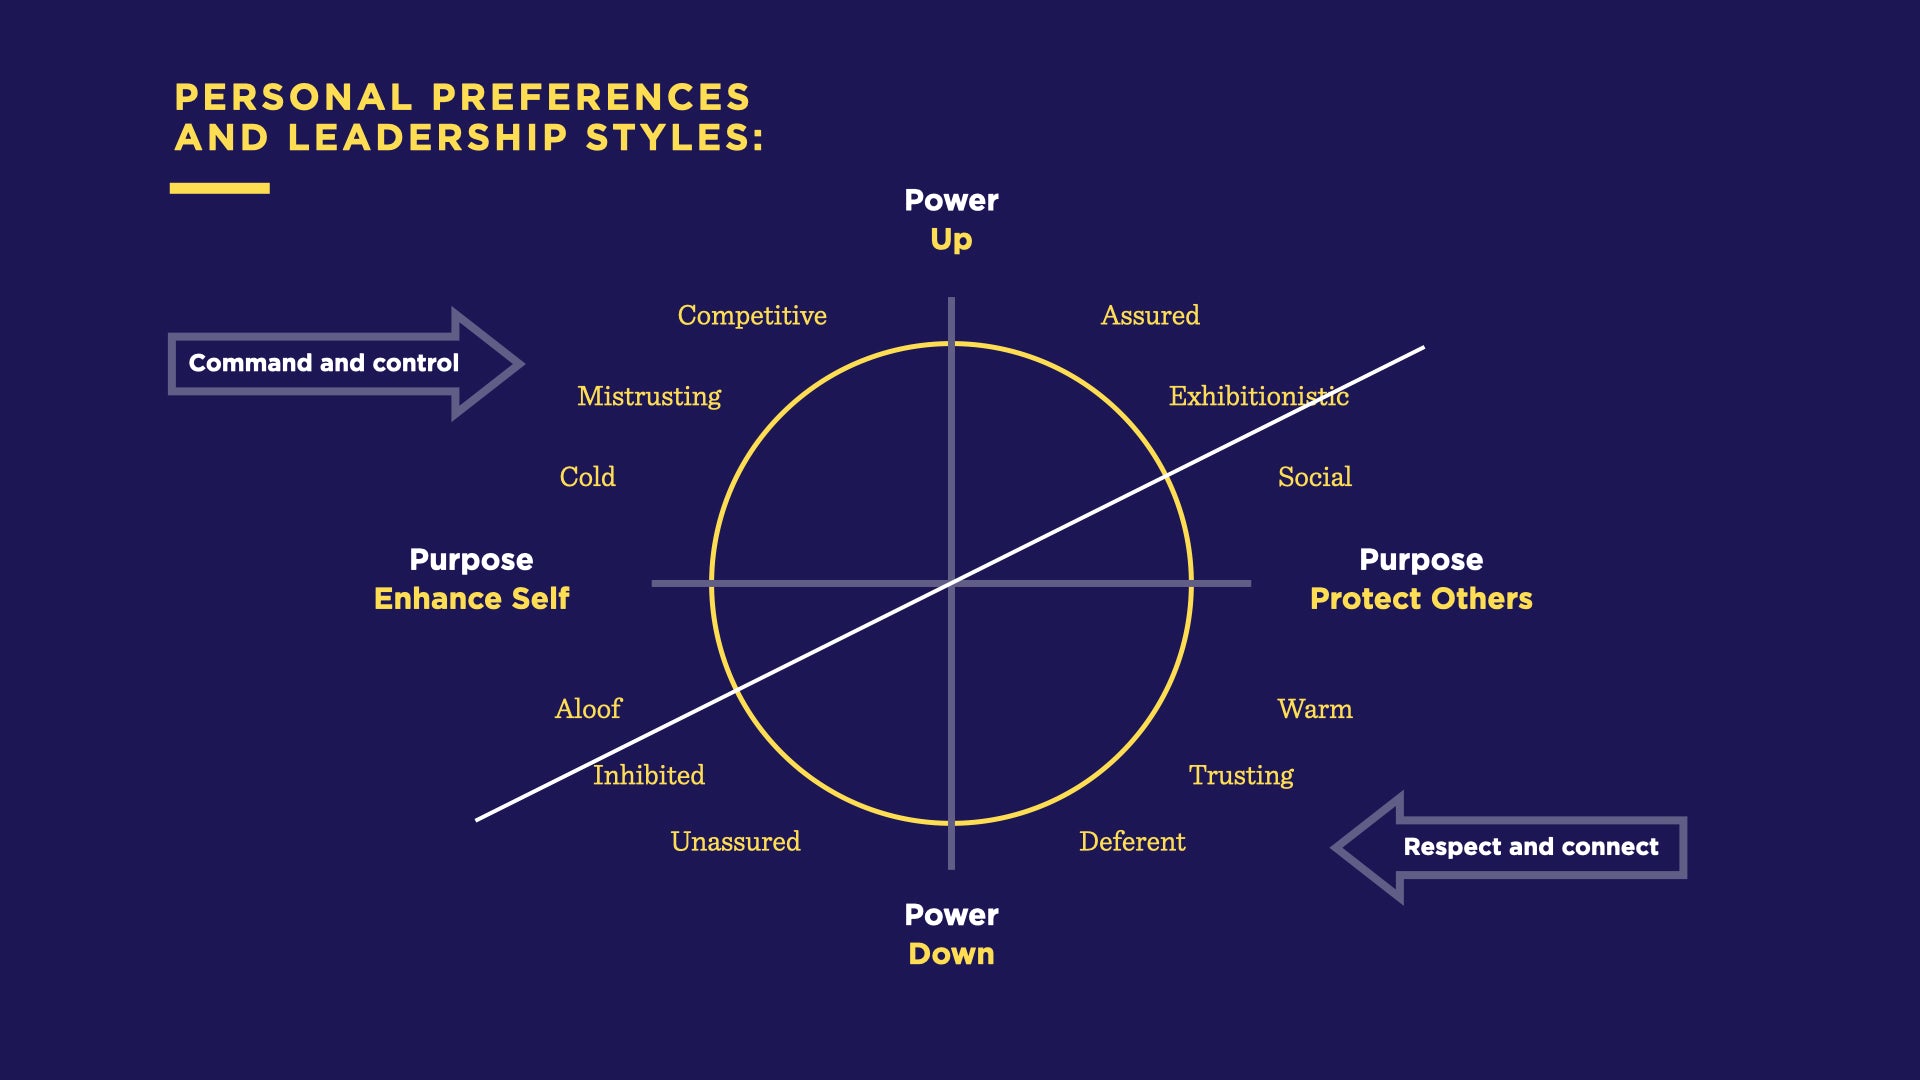 Personal Preferences and Leadership Styles chart